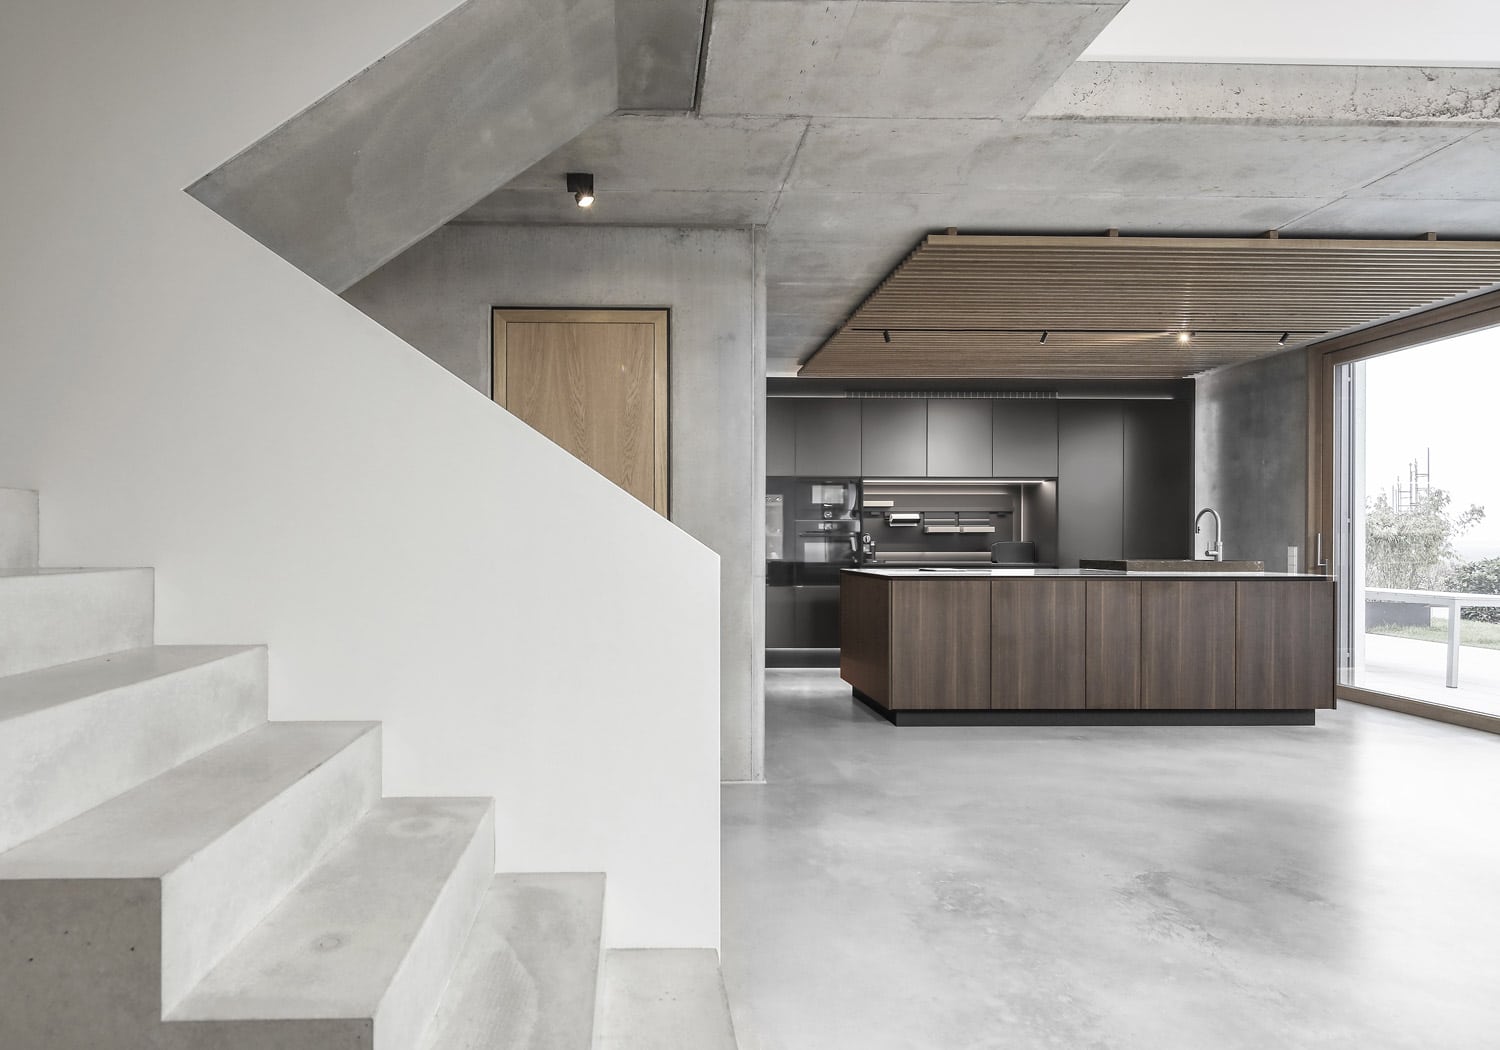 The kitchen was designed to be in harmony with the architecture and exterior of the home. 